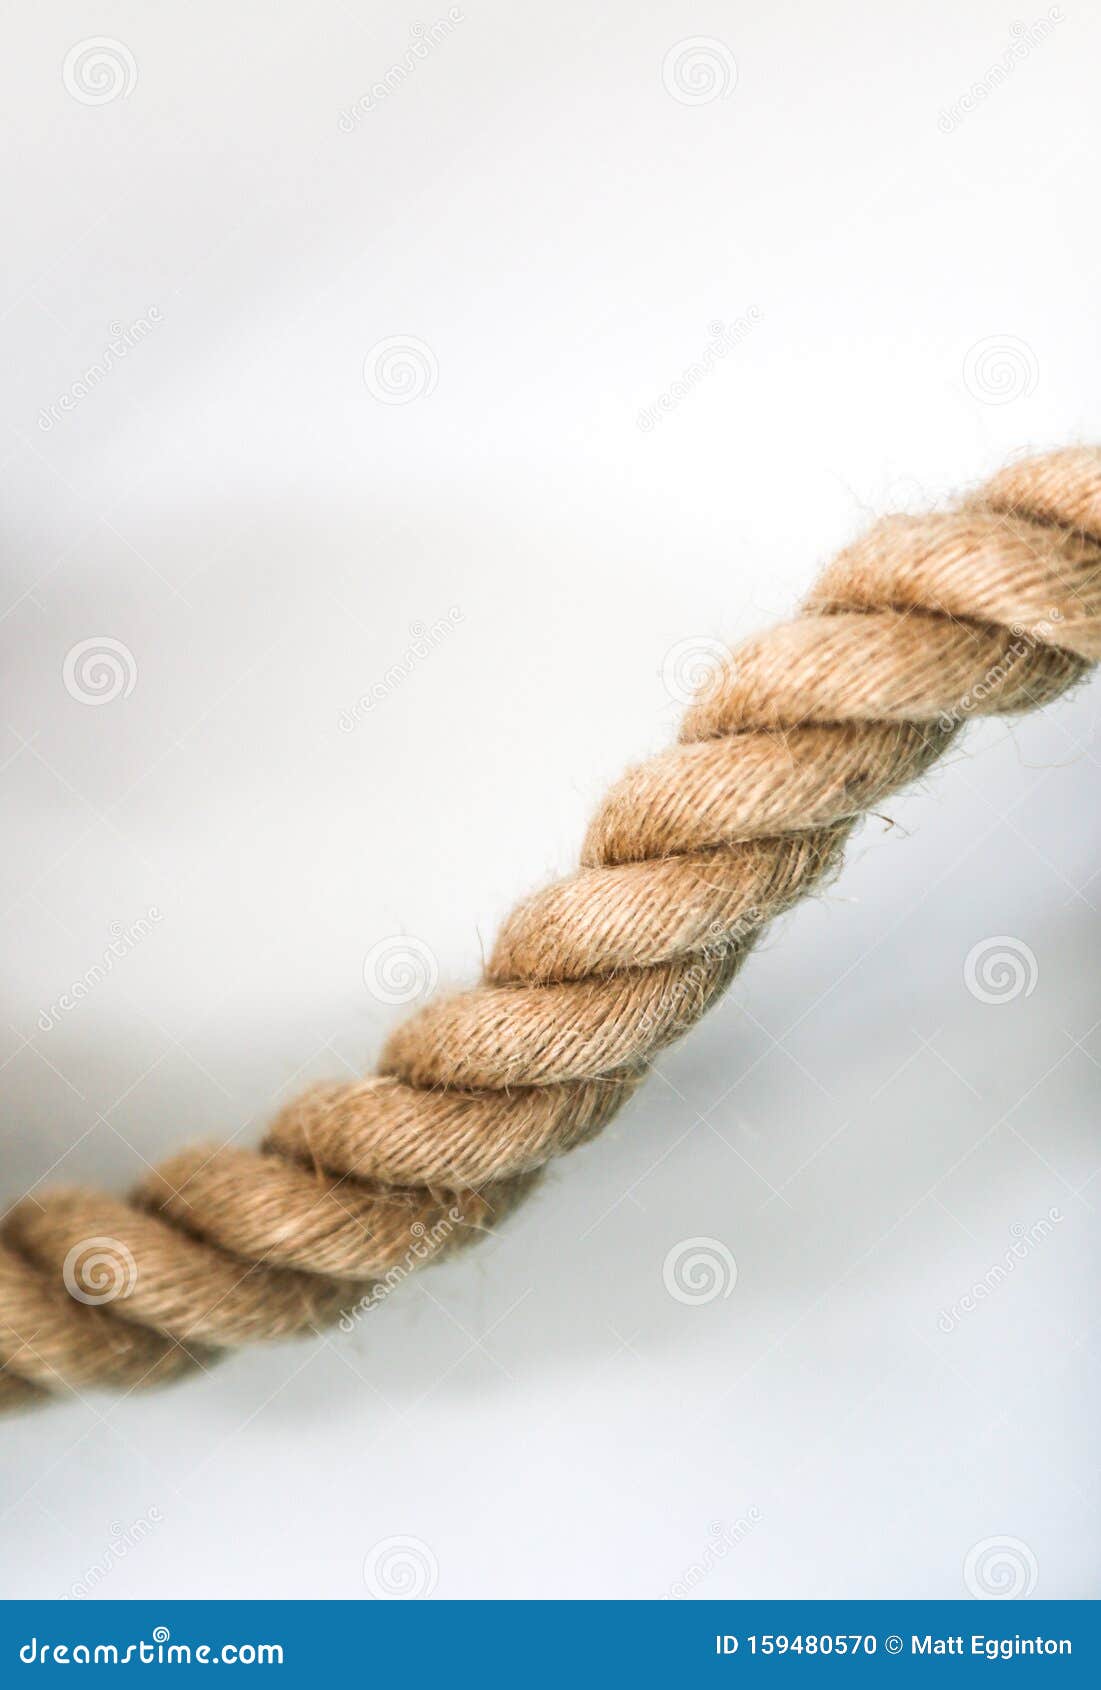 Rope Fragment, Isolated Thick Nautical Rope Hemp Rope Stock Photo - Image  of grunge, connection: 159480570